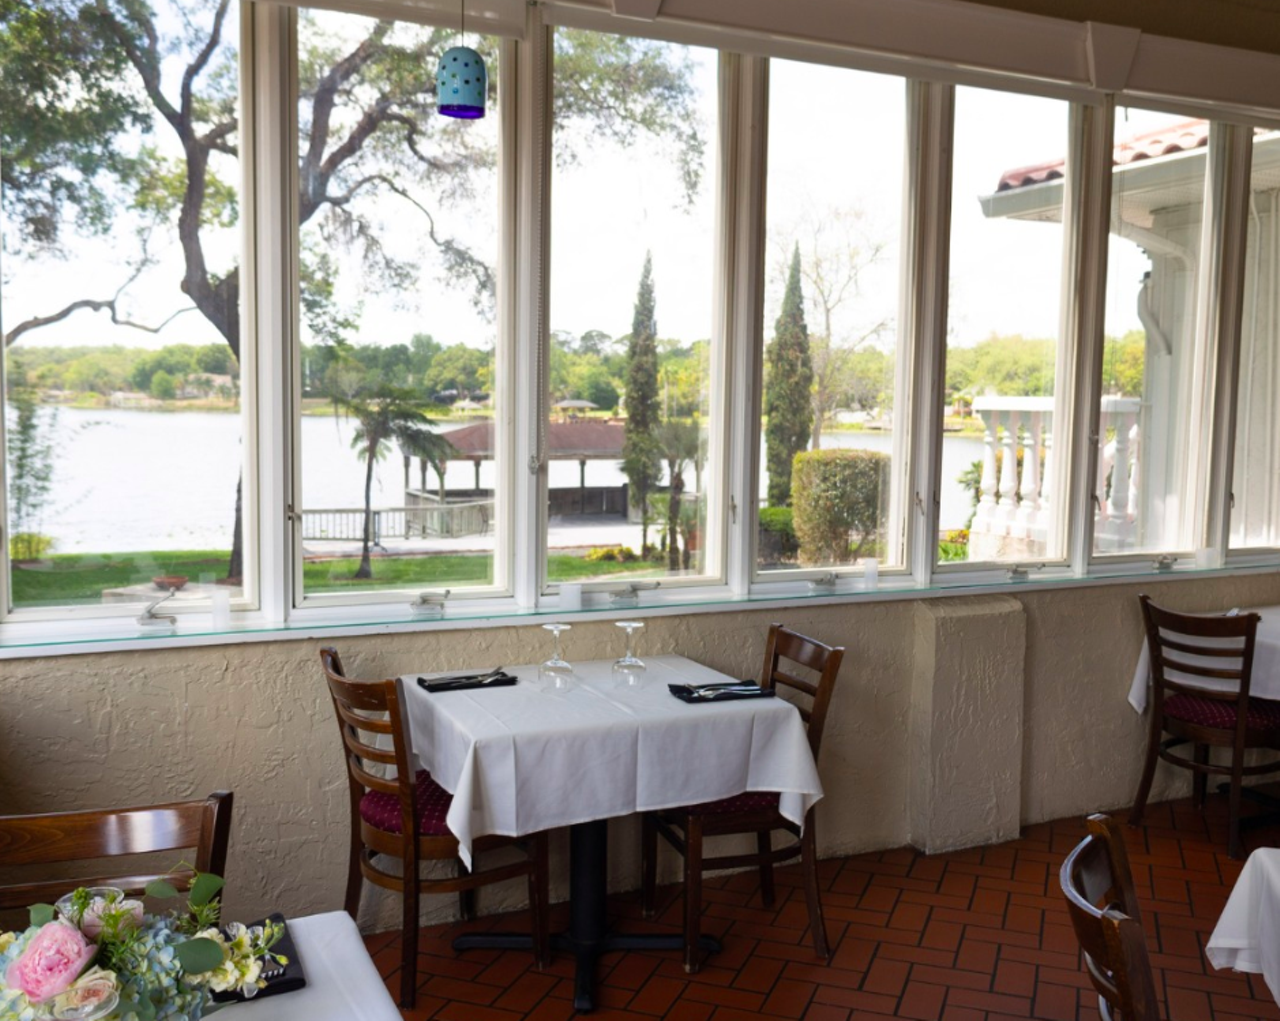 Enzo's on the Lake
1130 S. U.S. Highway 17-92, Longwood
Enzo’s on the Lake got its start in a humble Central Florida home in 1980. In the years, the restaurant has become the area's go-to romantic date destination par excellence, serving Italian cuisine with a chic spin.